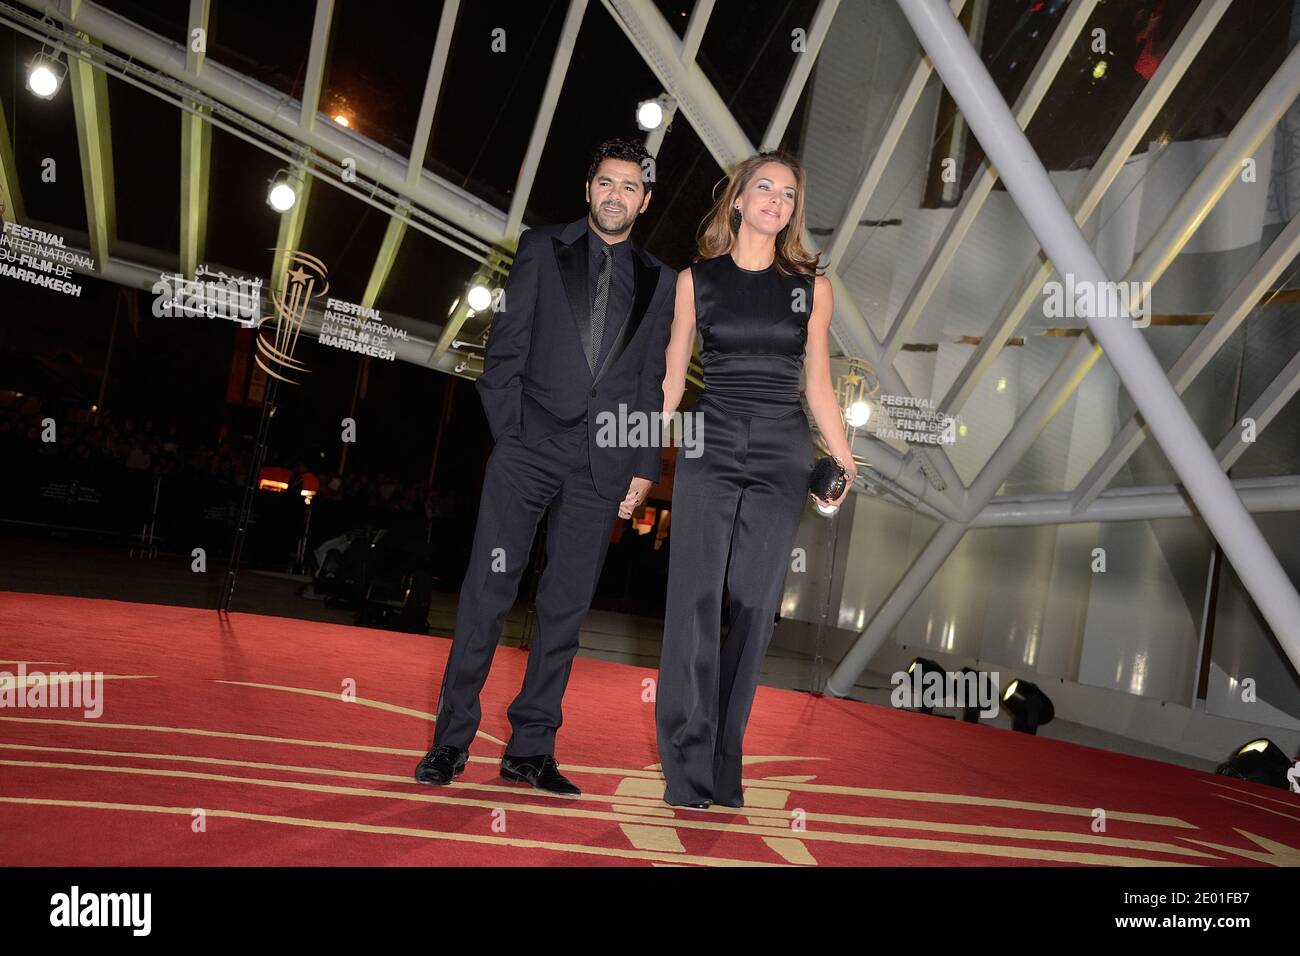 Jamel Debbouze and his wife Melissa Theuriau attending the screening of 'Like Father, Like Son' as part of the 13th Marrakech Film Festival, in Marrakech, Morocco on December 1, 2013. Photo by Nicolas Briquet/ABACAPRESS.COM Stock Photo